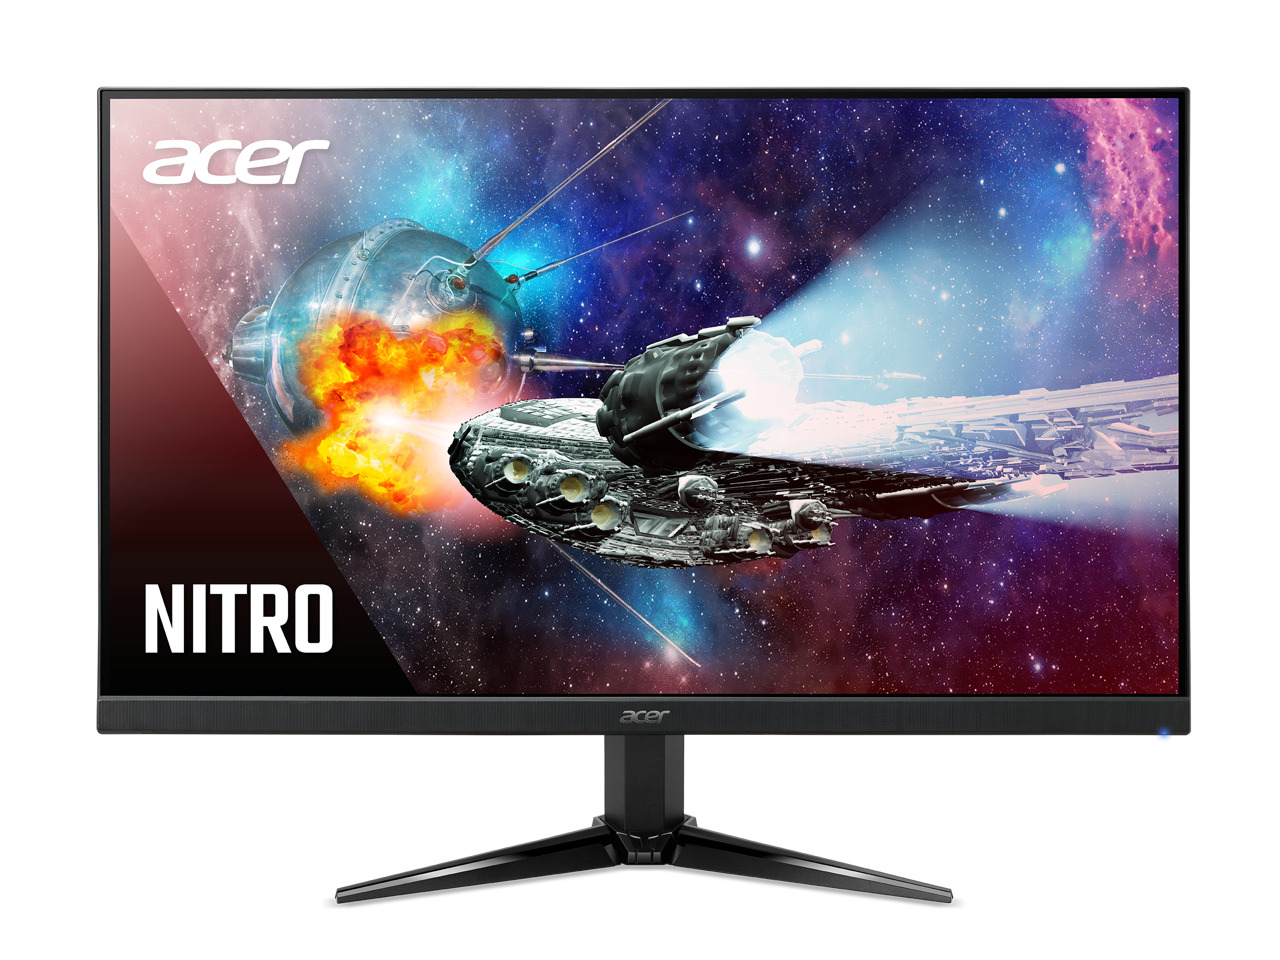 Acer Nitro QG241Y S3 23.8inch 1920x1080 180Hz Refresh rate 1ms response time AMD